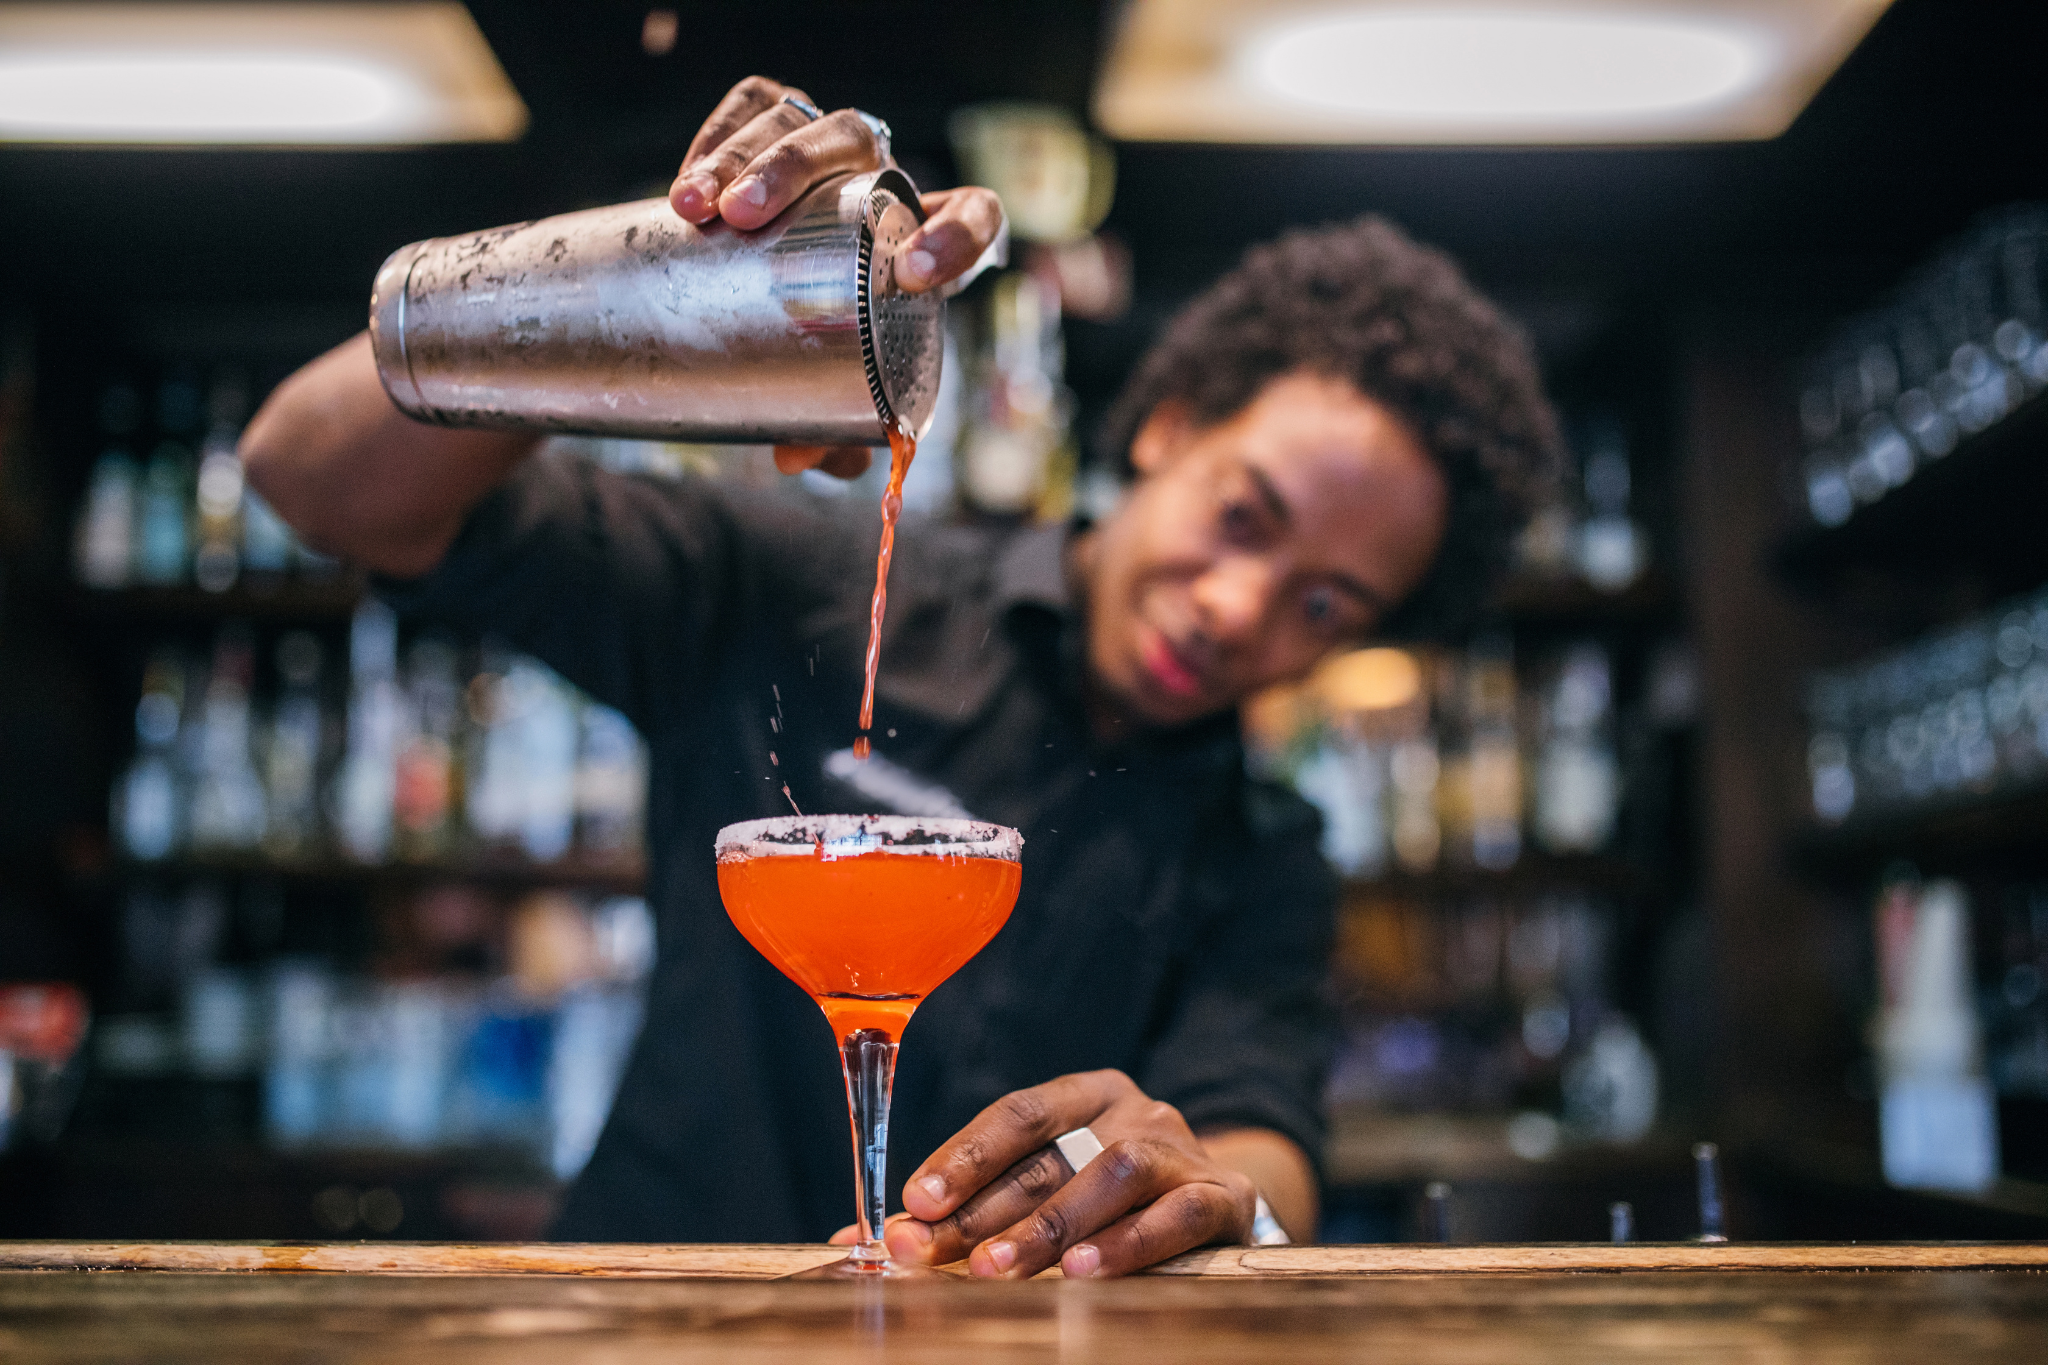 Cocktail Culture: Where To Find New Orleans’ Most Decadent Drinks